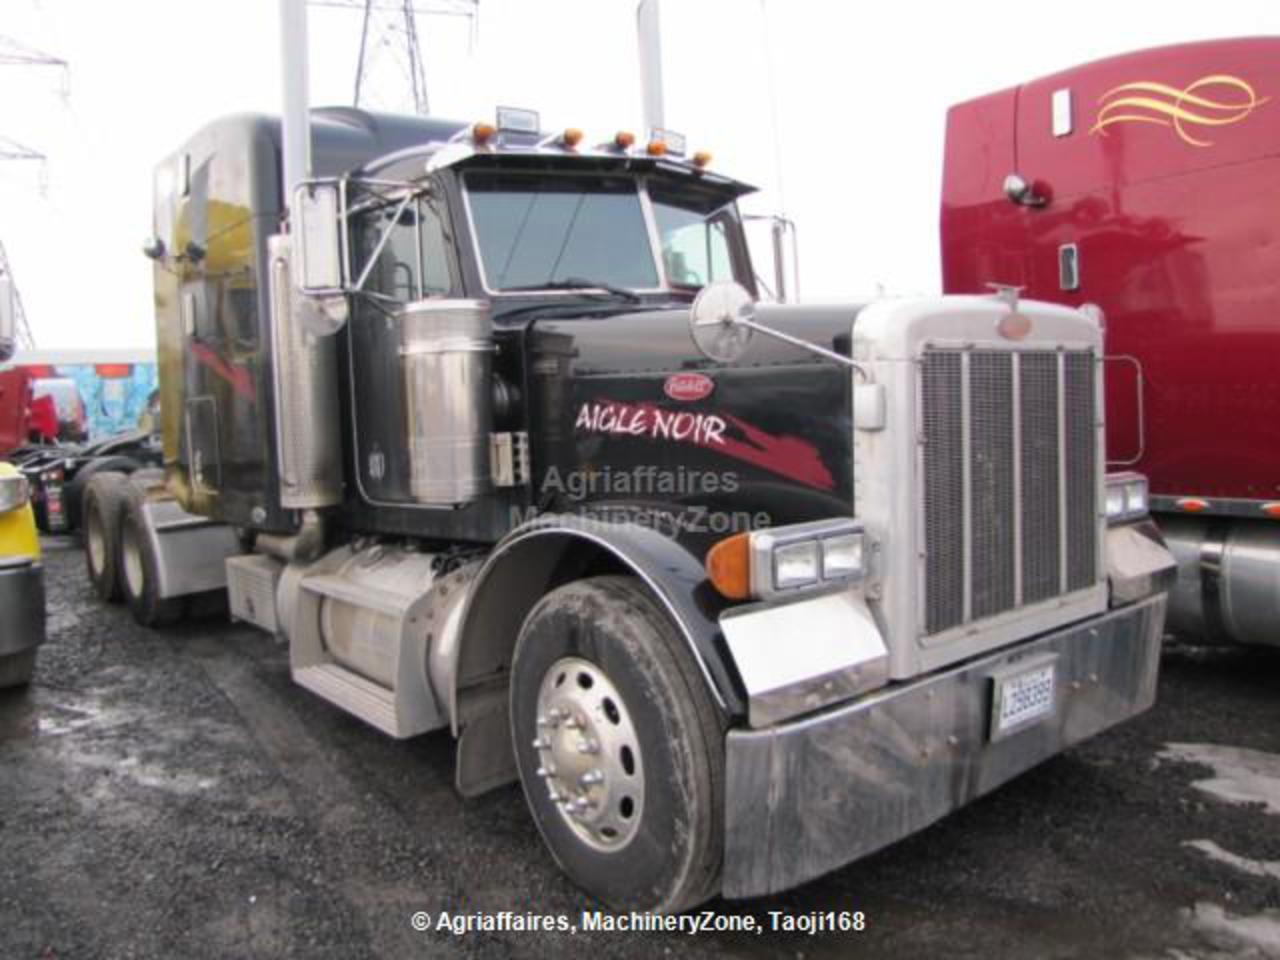 Peterbilt 260GD 5 Ton Tractor Photo Gallery: Photo #09 out of 10 ...